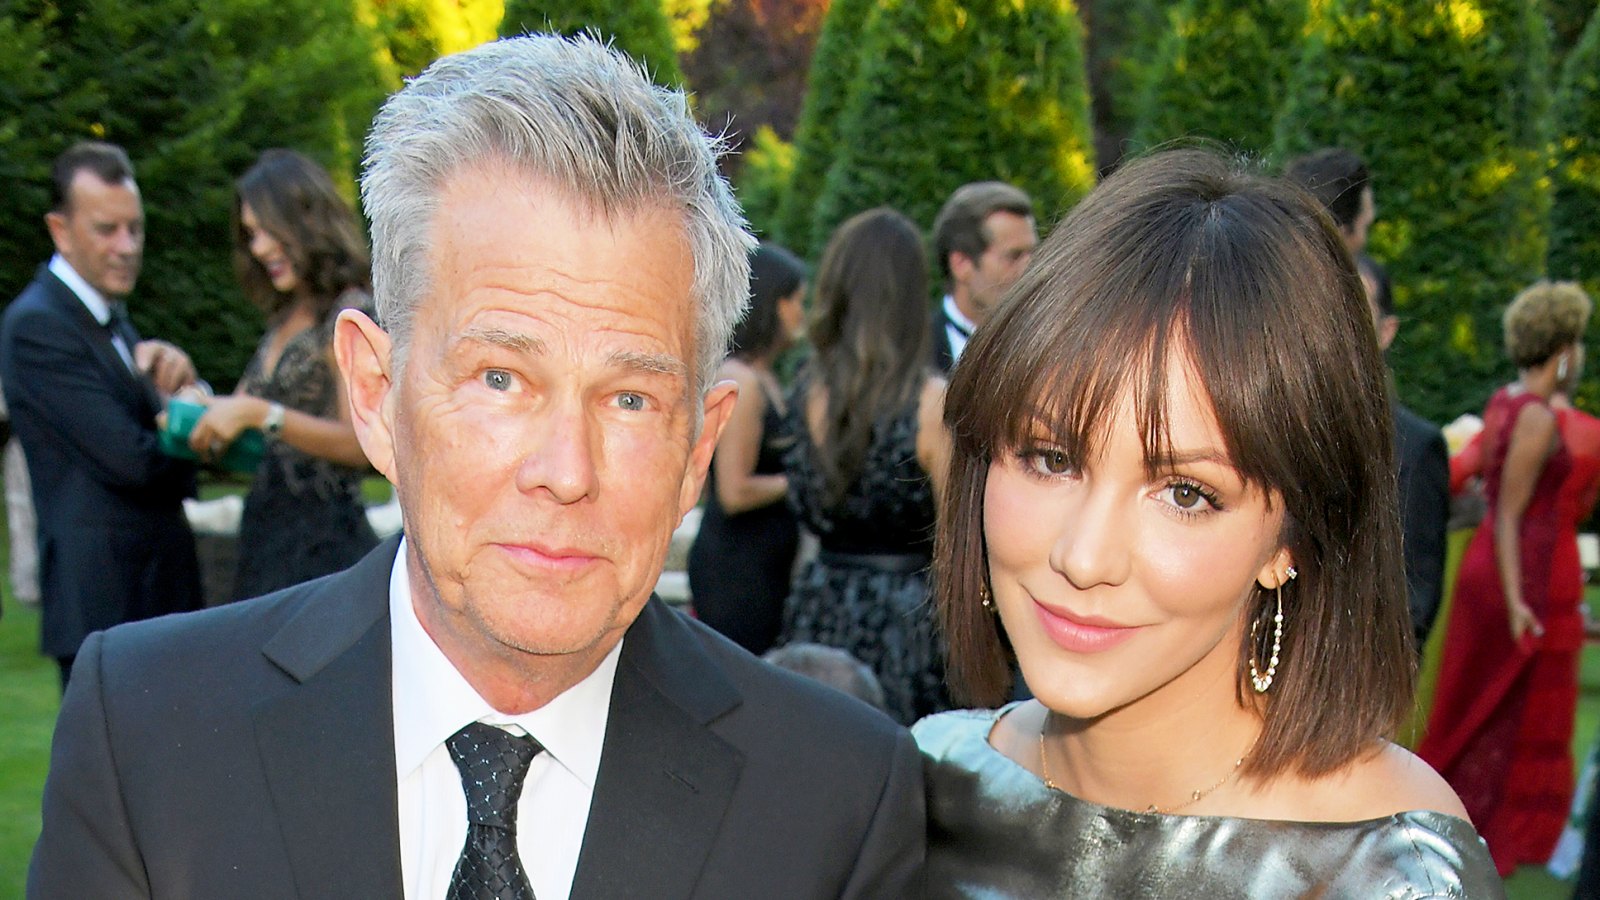 David Foster and Katharine McPhee attend the Argento Ball for the Elton John AIDS Foundation on June 27, 2018 in Windsor, England.